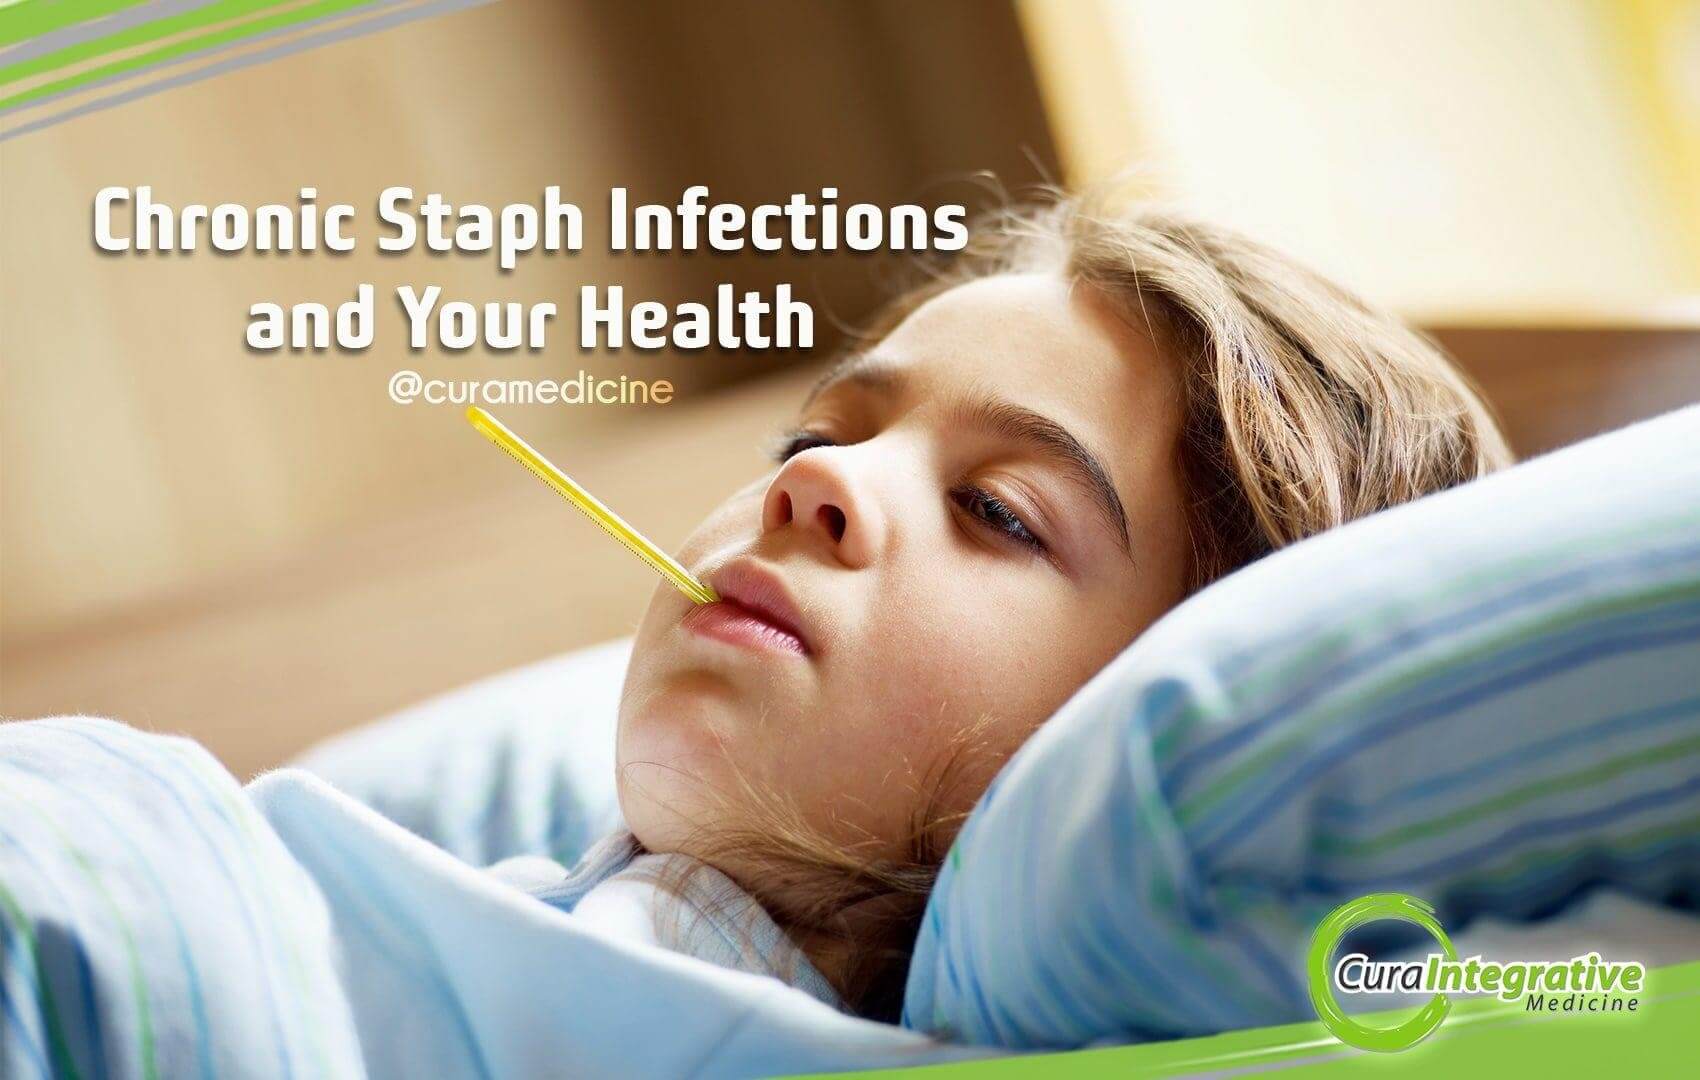 Chronic Staph Infections and Your Health